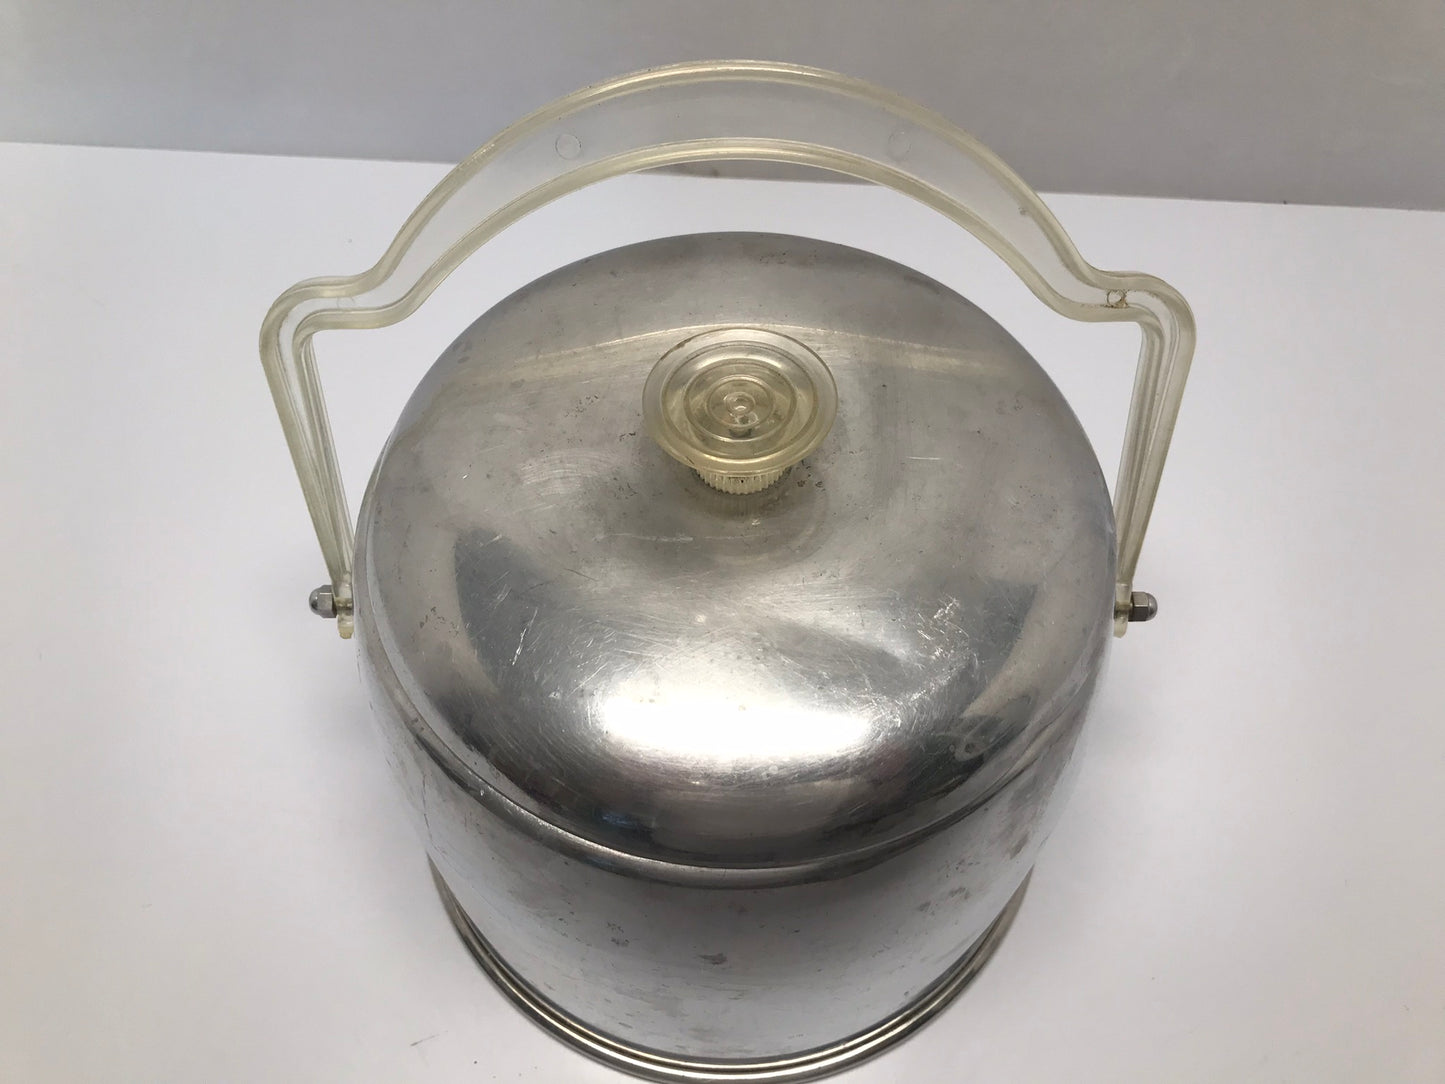 Vintage, Aluminum Kromex Ice Bucket with Lucite Handle and Knob Finial on Lid Swing Handle,Marked Kromex on Bottom Great For Fun Bar